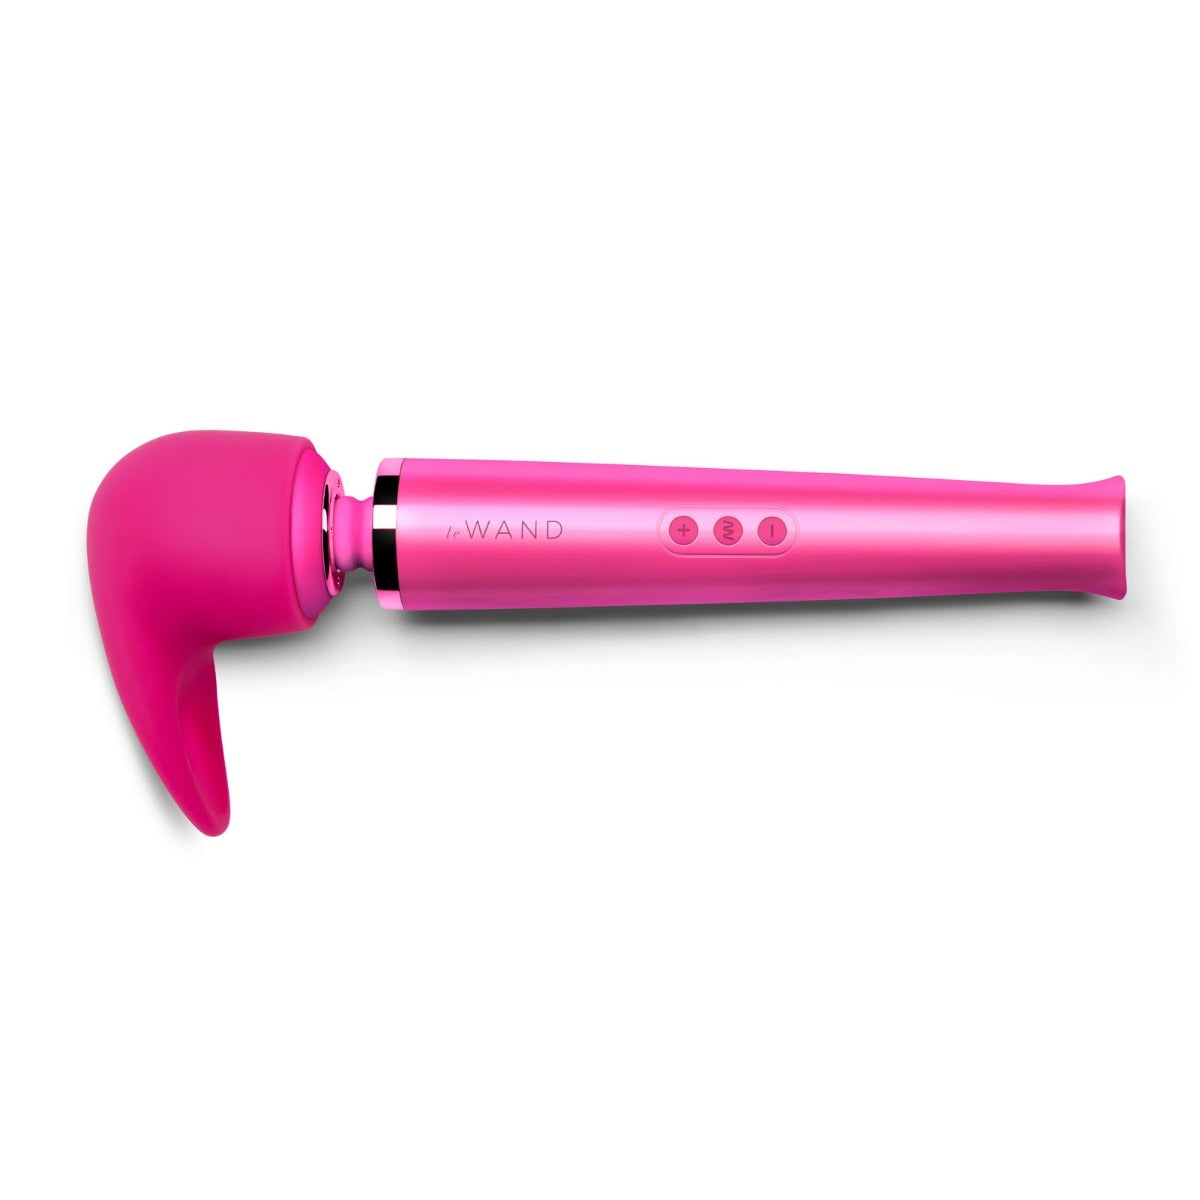 Le Wand Flick Flexible Silicone Attachment Pink